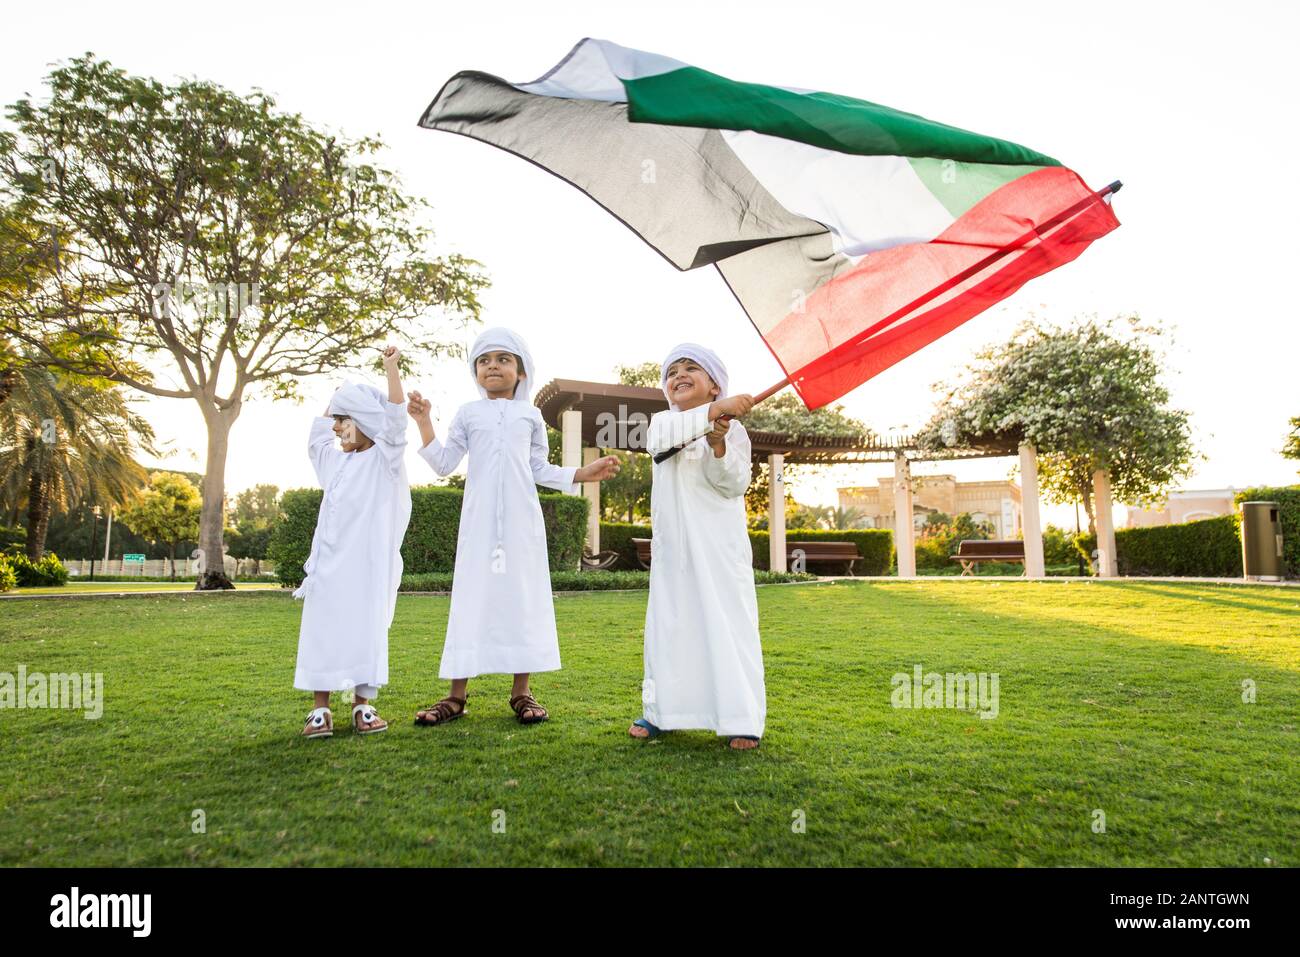 Group of middle-eastern kids wearing white kandora playing in a park in Dubai - Happy group of friends having fun outdoors in the UAE Stock Photo